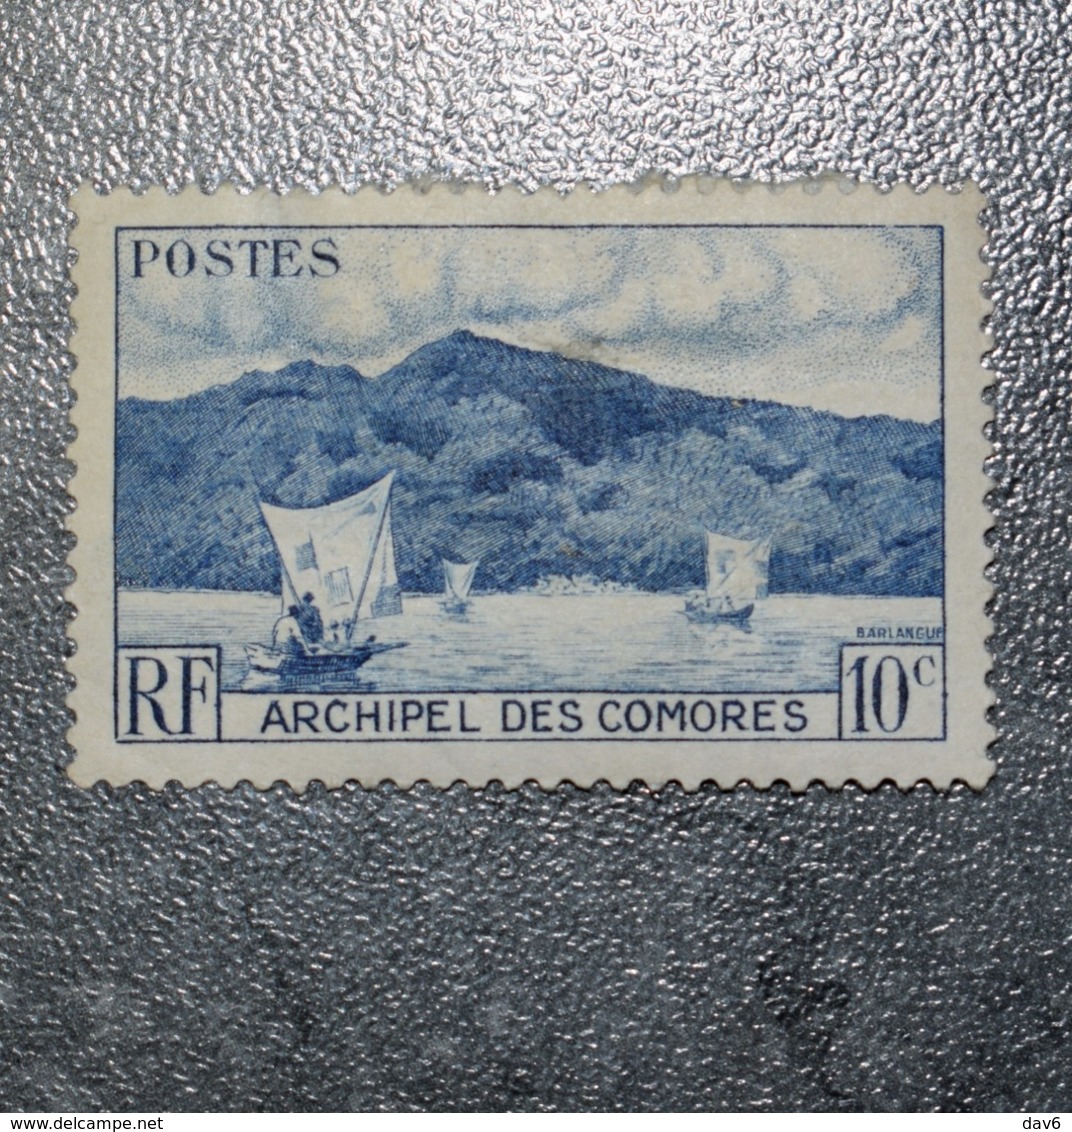 COMORO  ILS.   STAMPS FRANCE    1950     ~~L@@K~~ - Used Stamps